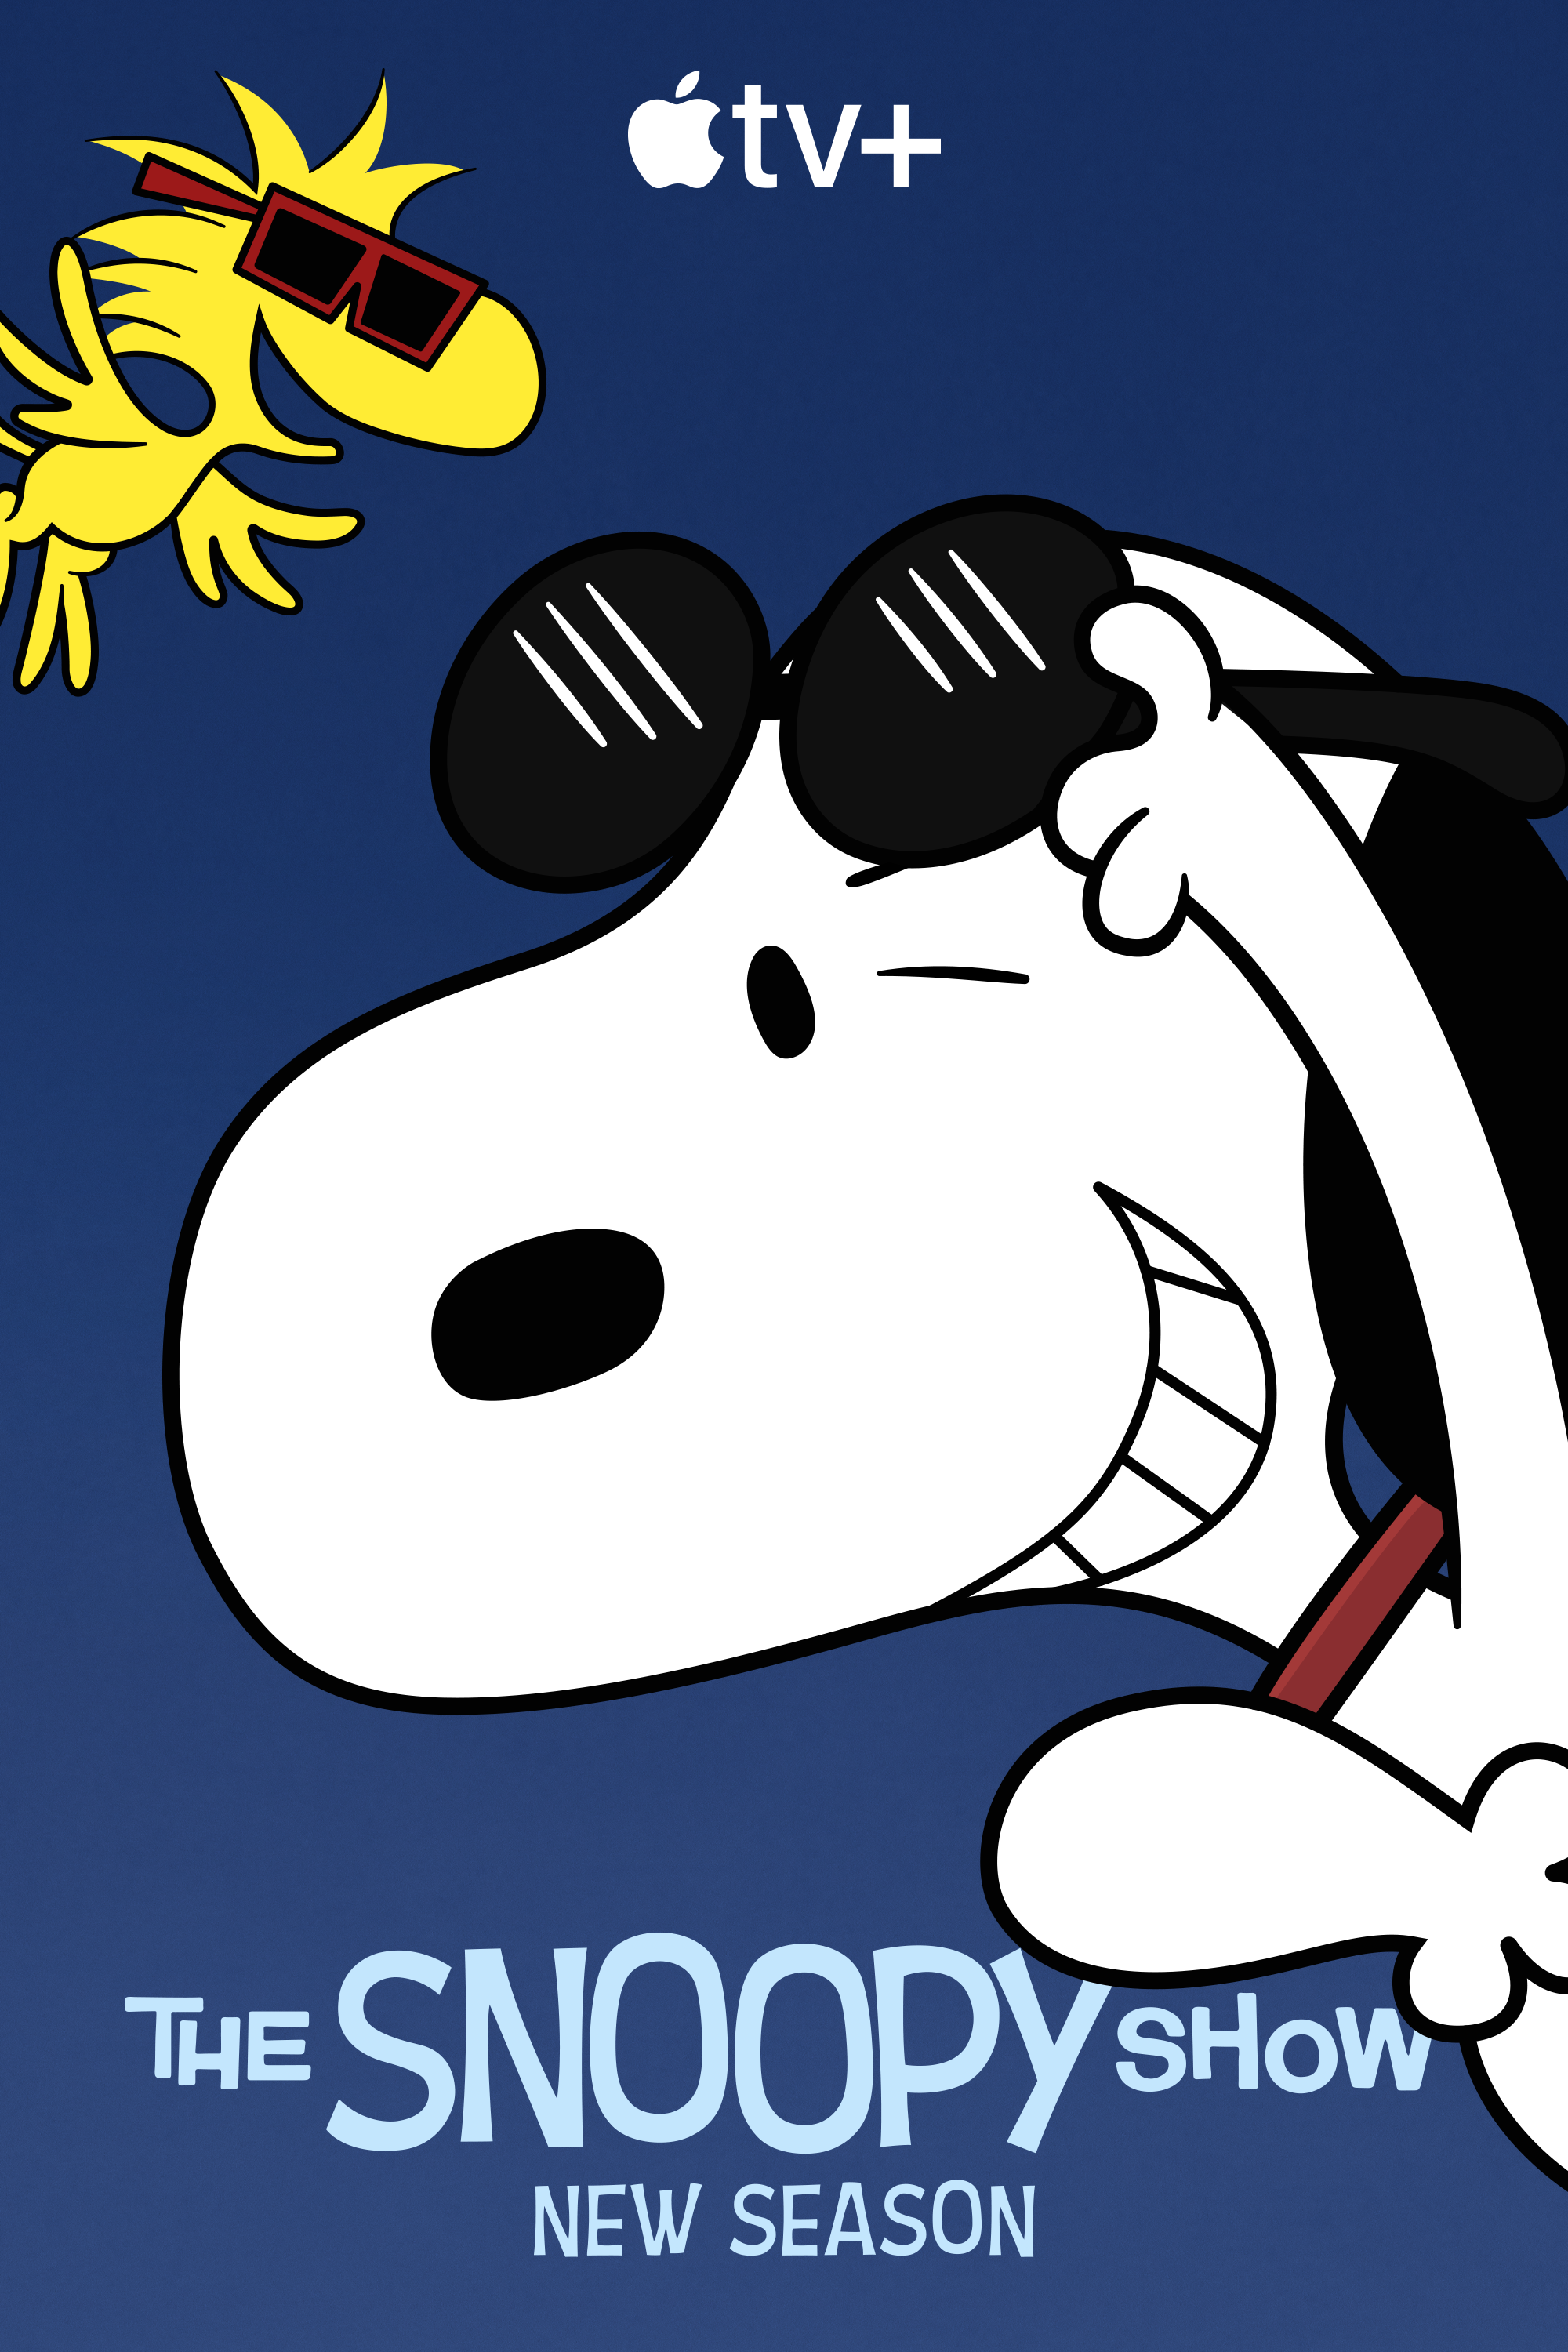 Apple TV+ debuts trailer for season three of beloved kids and family series  “The Snoopy Show” - Apple TV+ Press